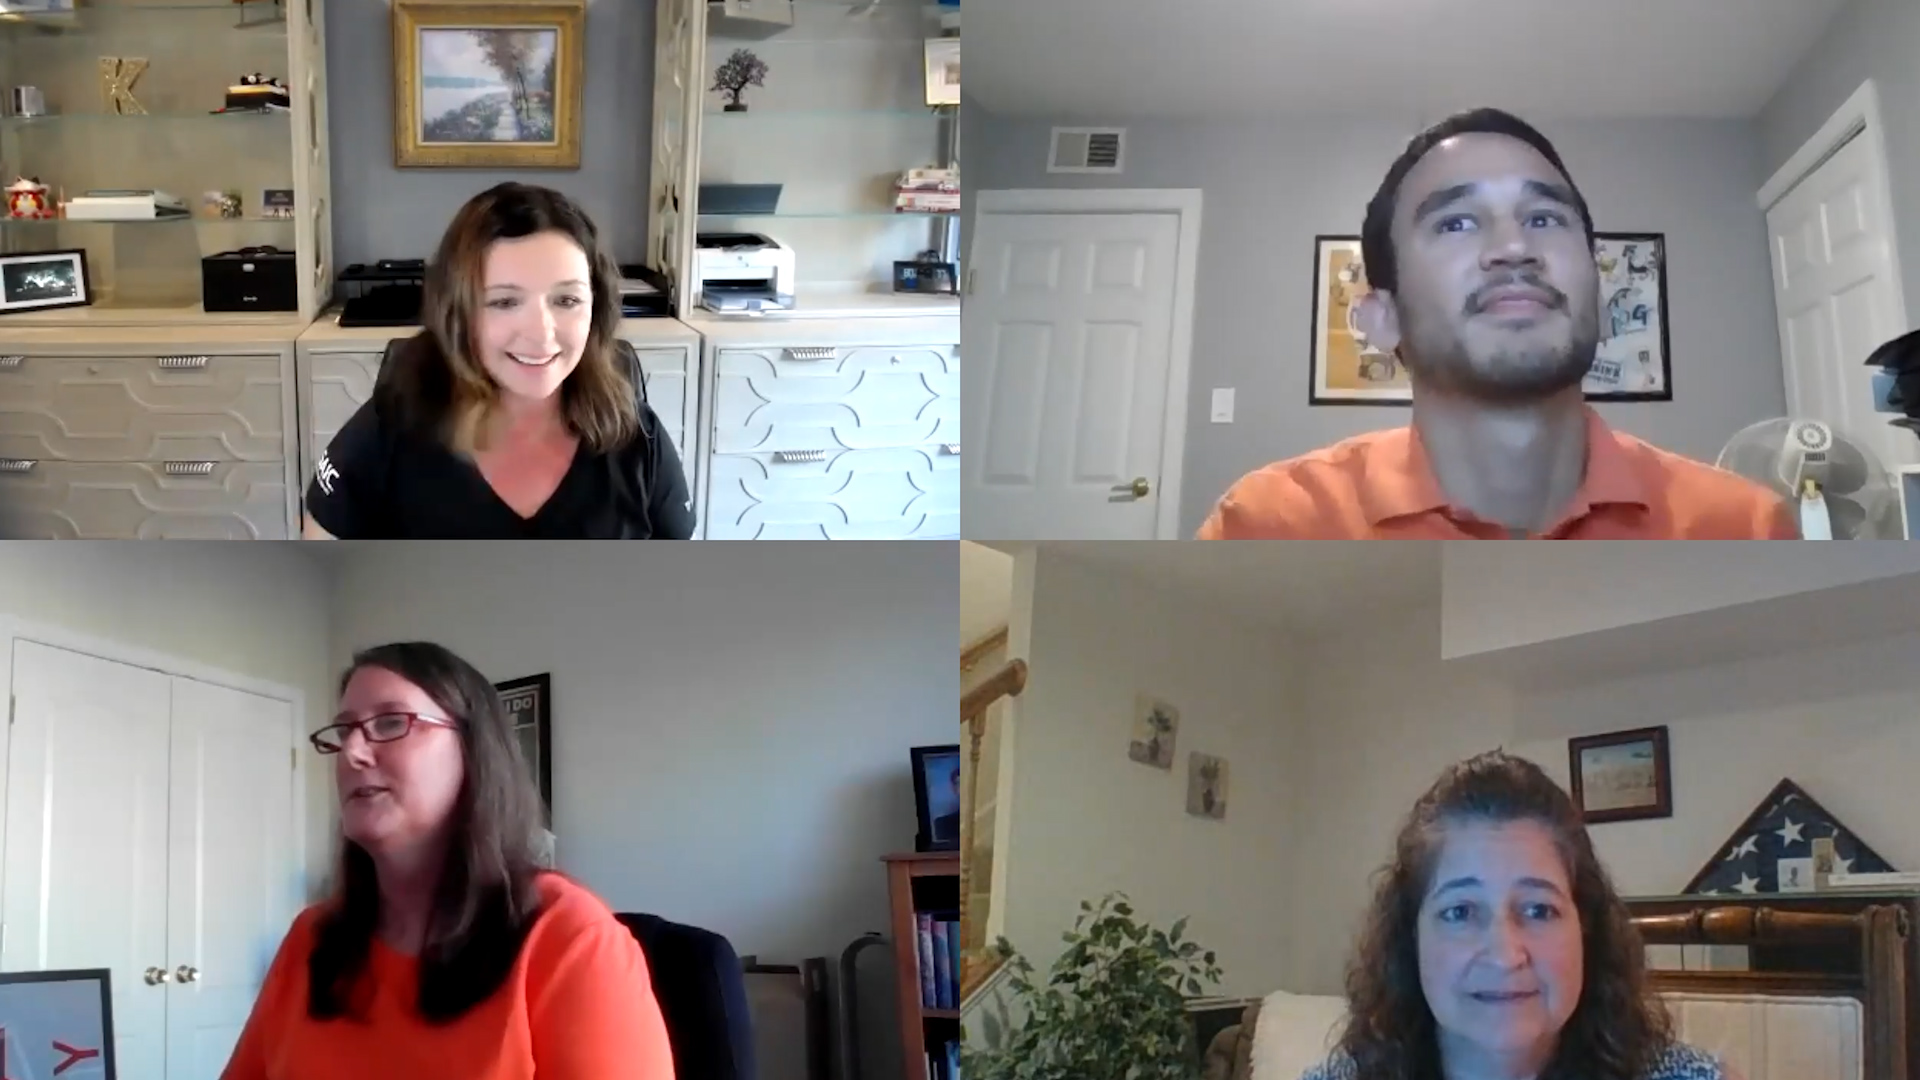 A group of people in a video call.